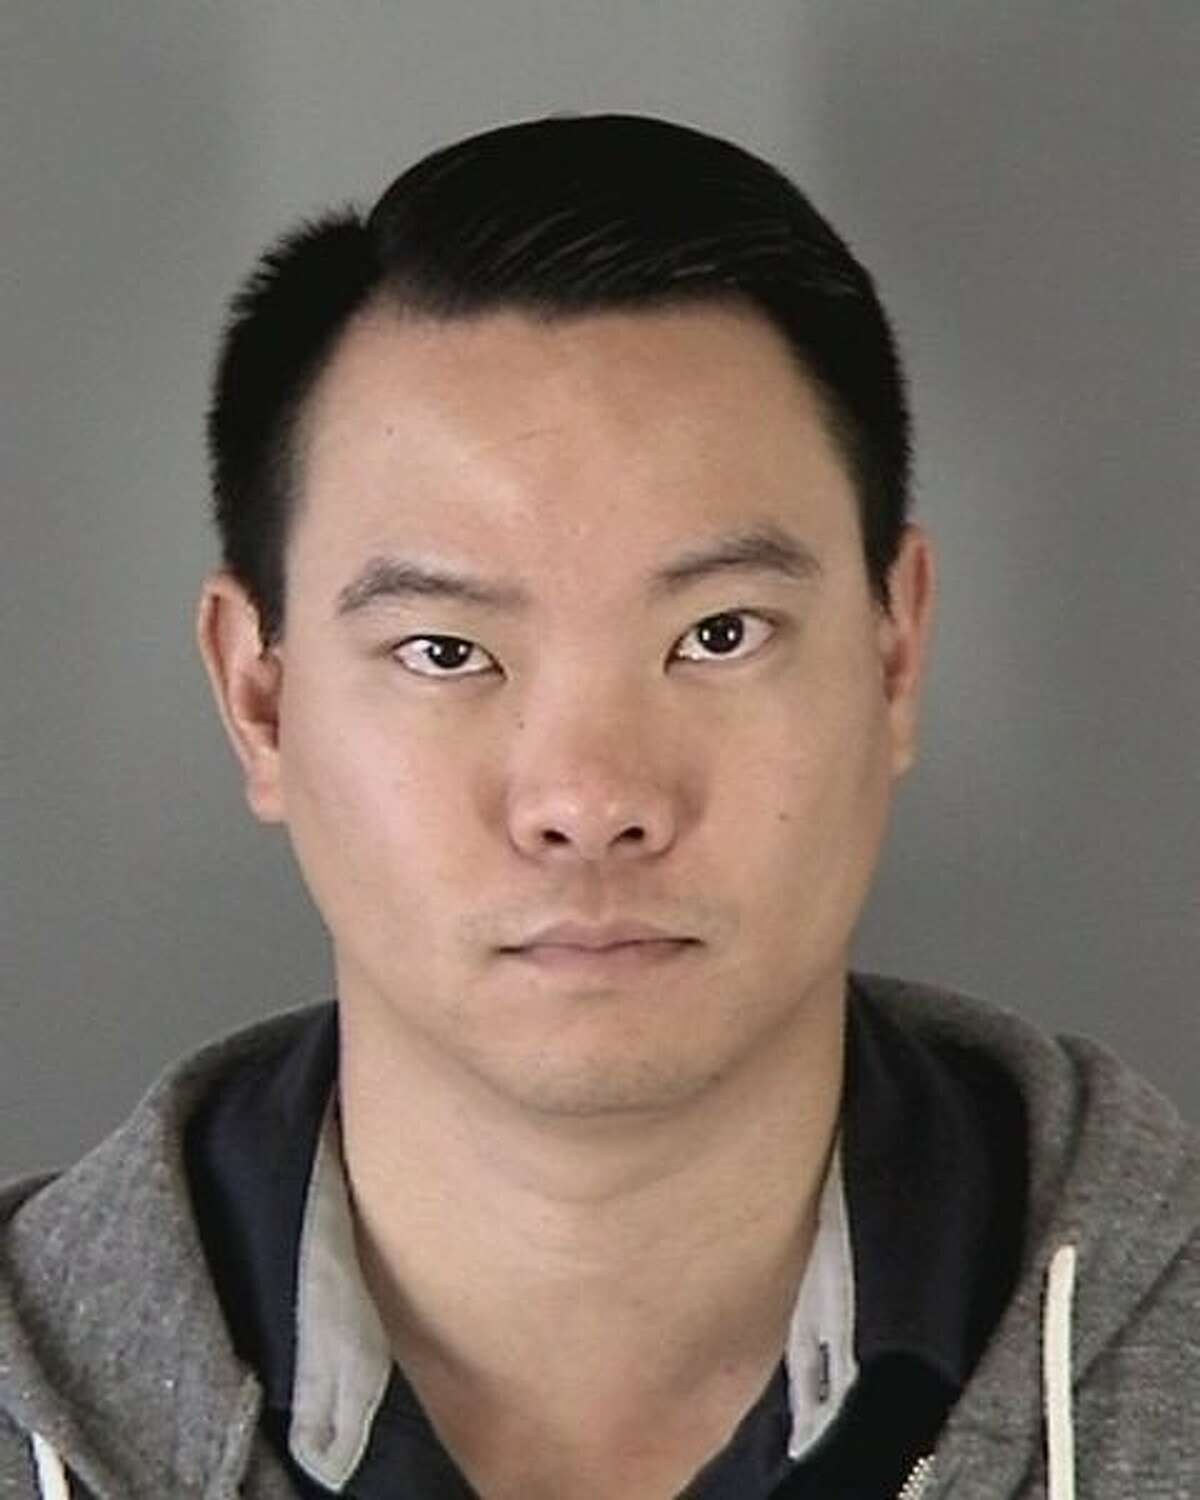 Officer Jason Lai was charged with two misdemeanor counts of unlawful possession of criminal history information and four misdemeanor counts of misuse of confidential Department of Motor Vehicles information, police said.